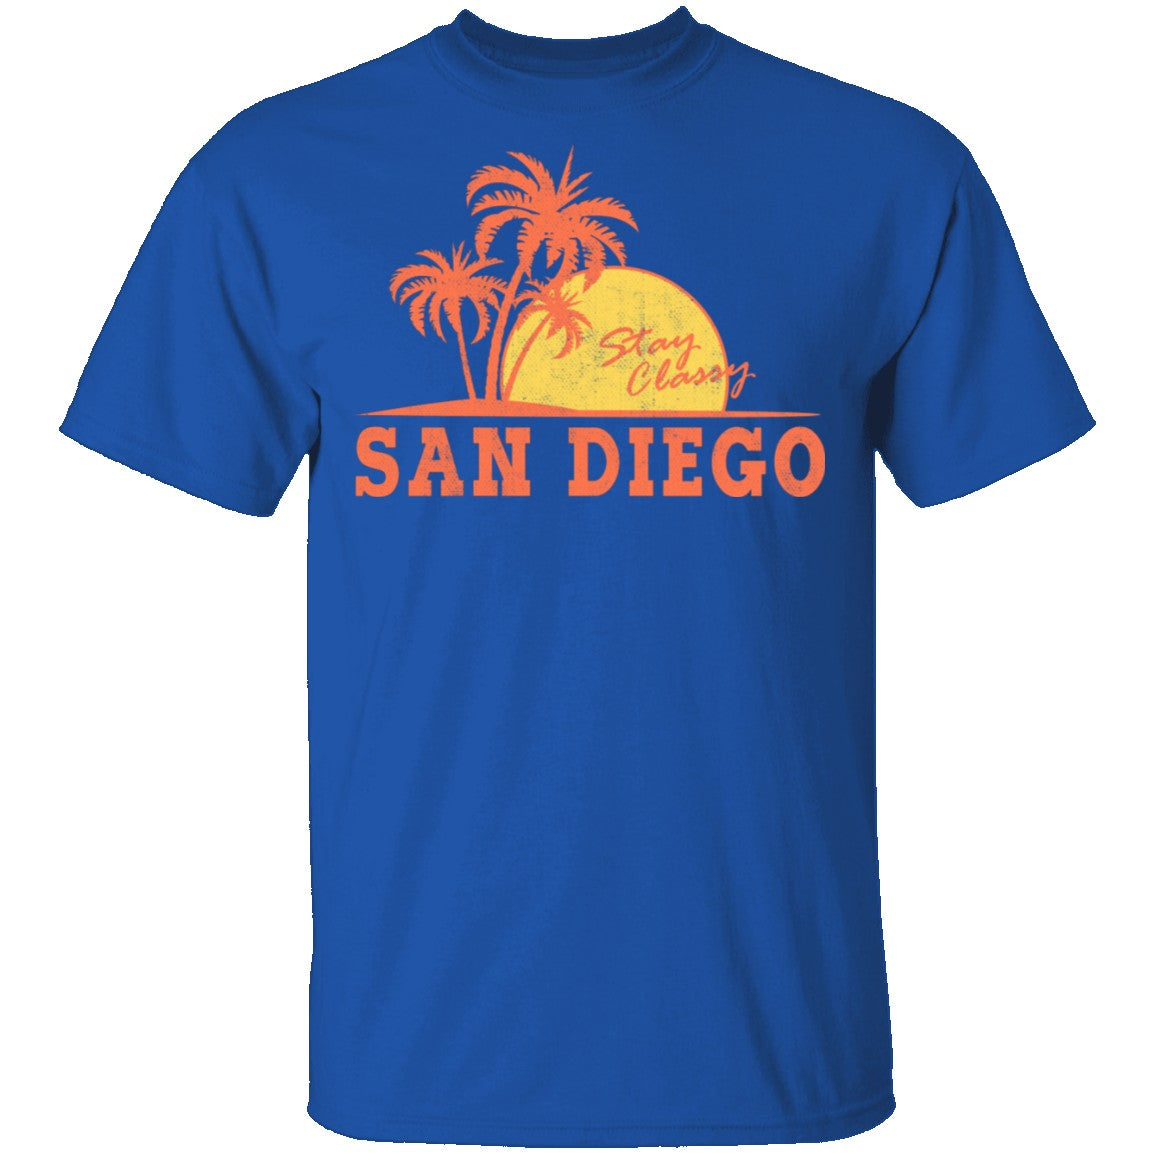 Stay Classy San Diego - T-Shirt | Gnarly Tees